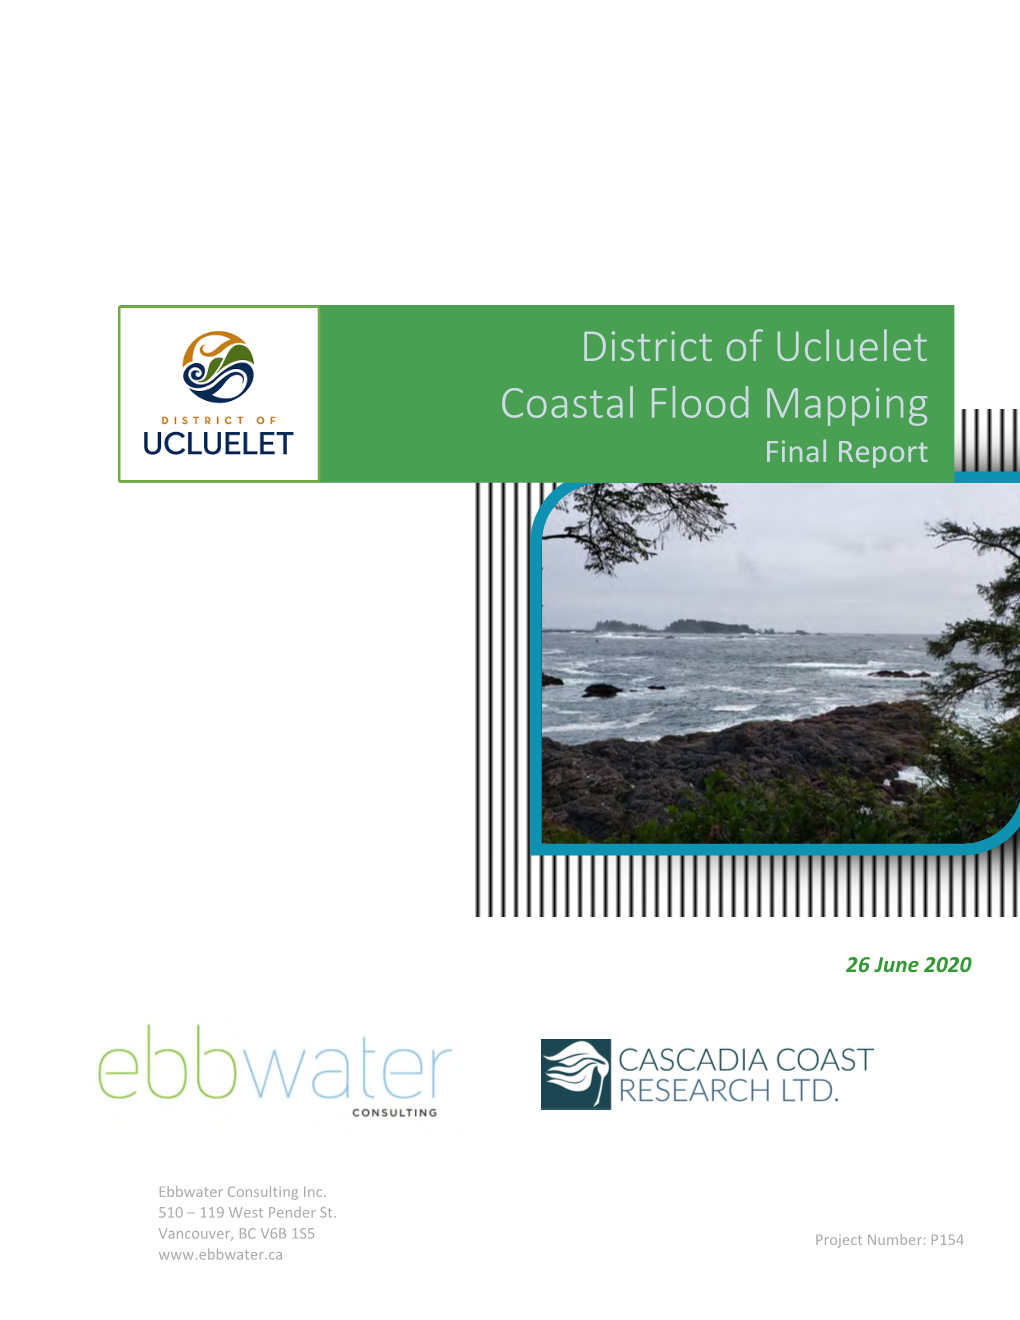 District of Ucluelet Coastal Flood Mapping Final Report